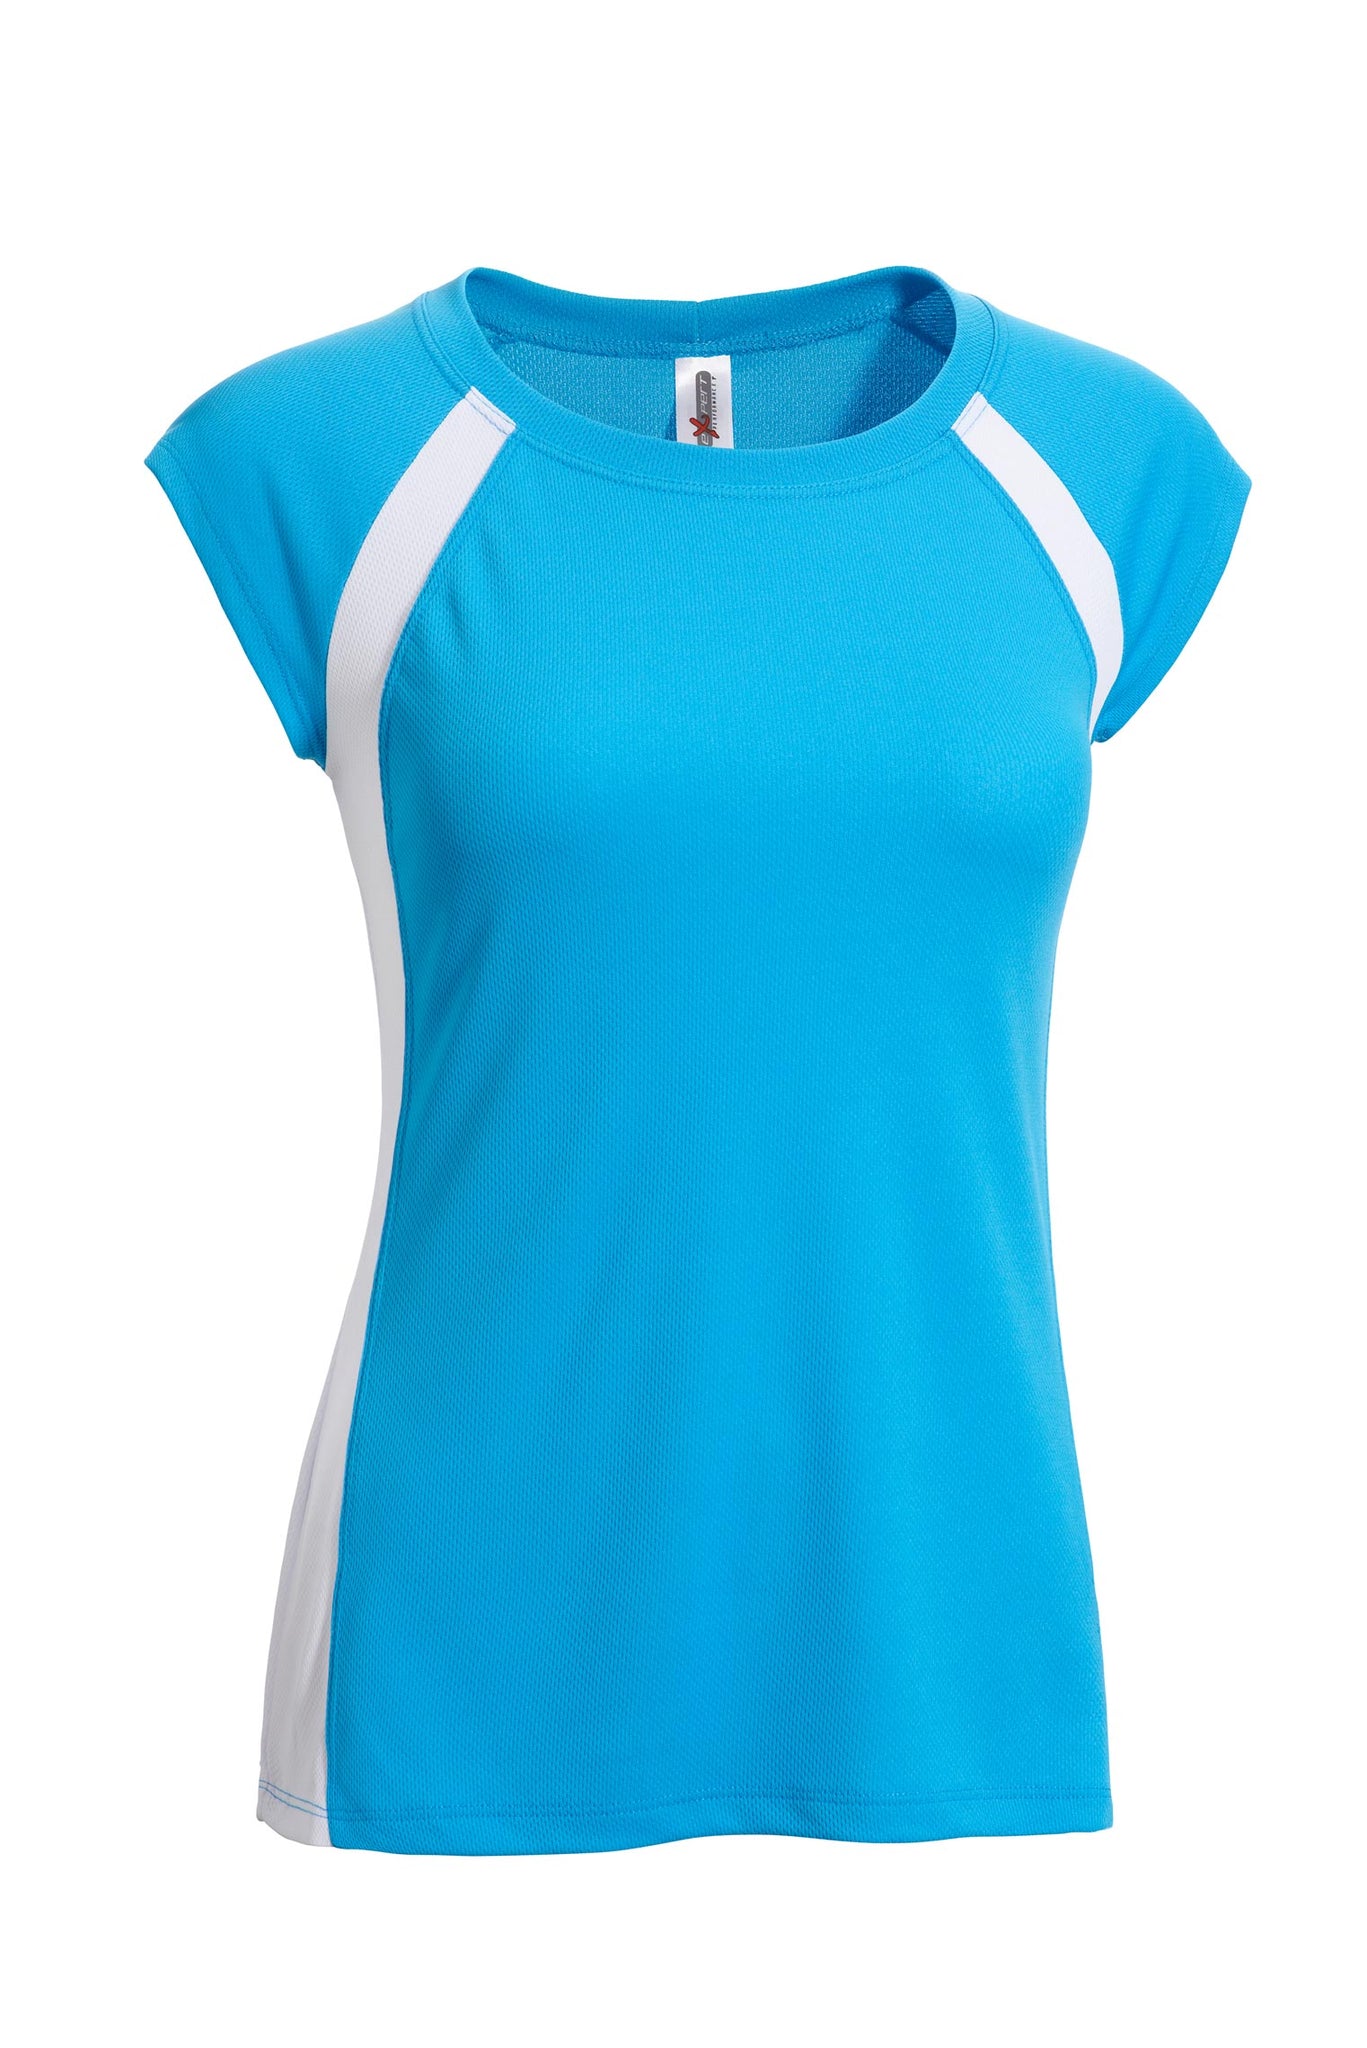 Expert Brand Wholesale Made in USA women's colorblock referee fitness tee in turquoise#turquoise